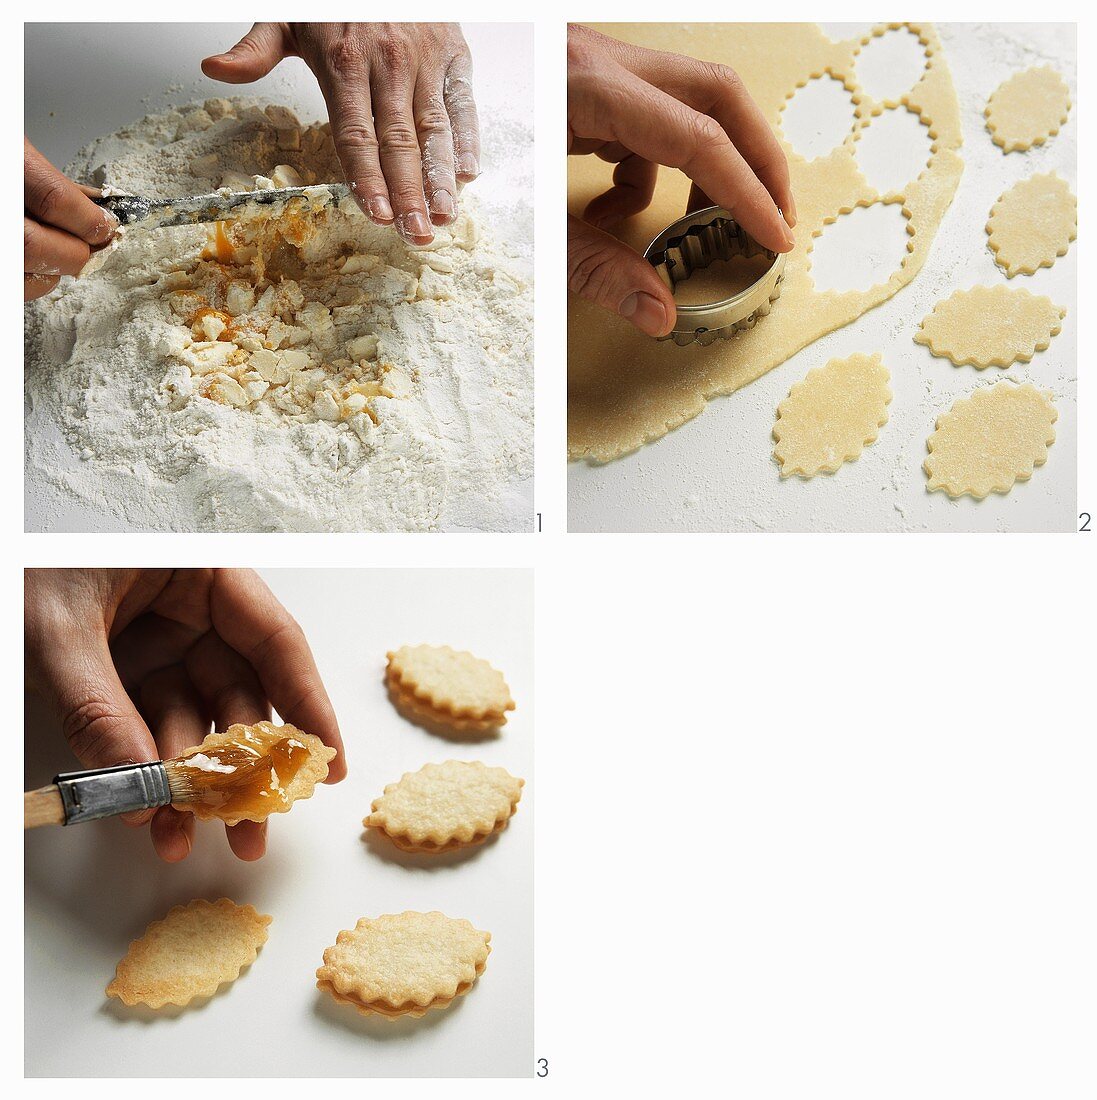 Baking apricot biscuits